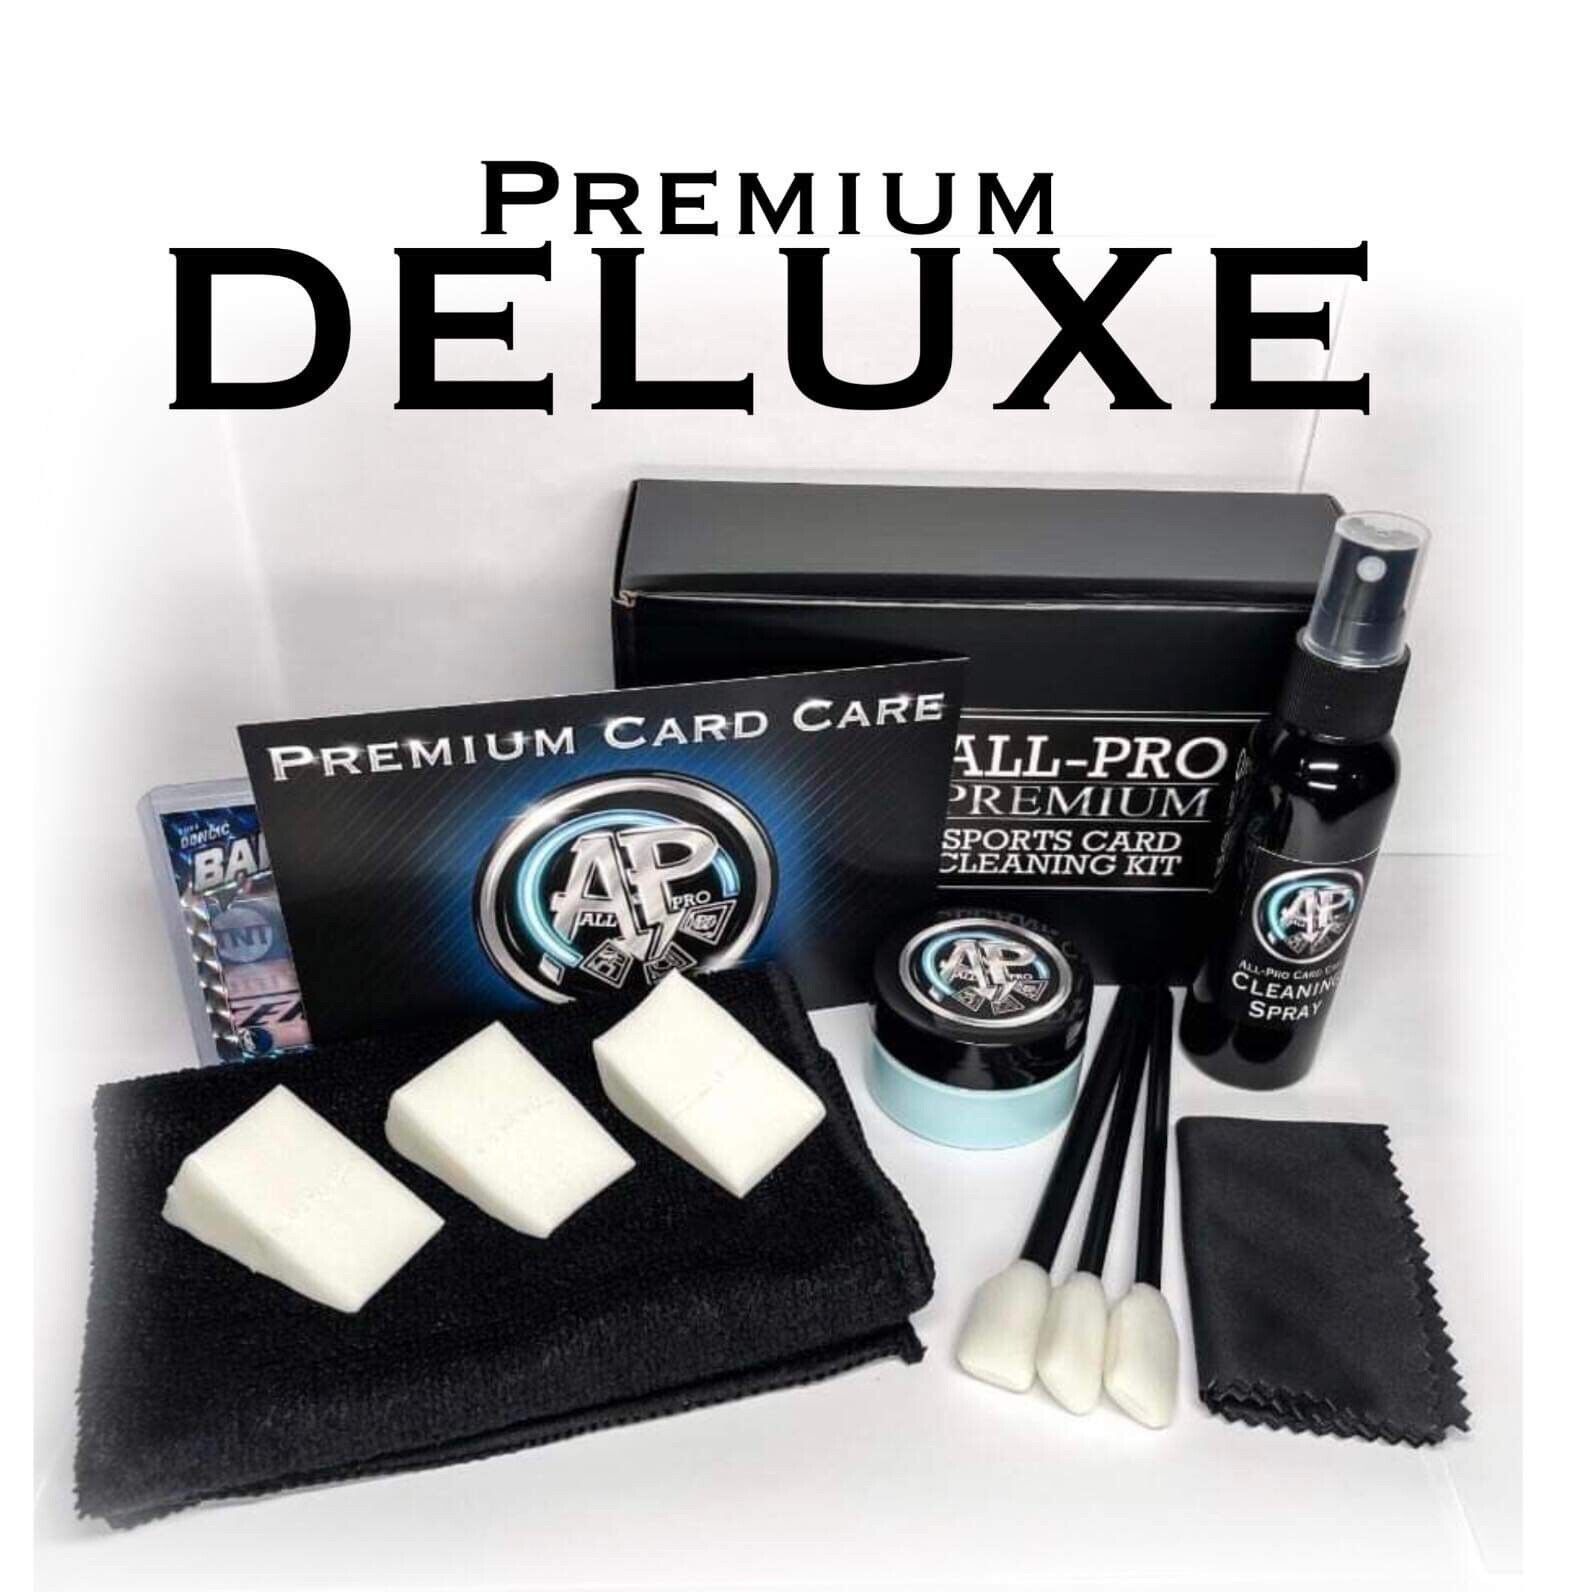 NEW -DELUXE- ALL-PRO Premium Sports Card Cleaning Kit 1 Bonus Card In Every Box